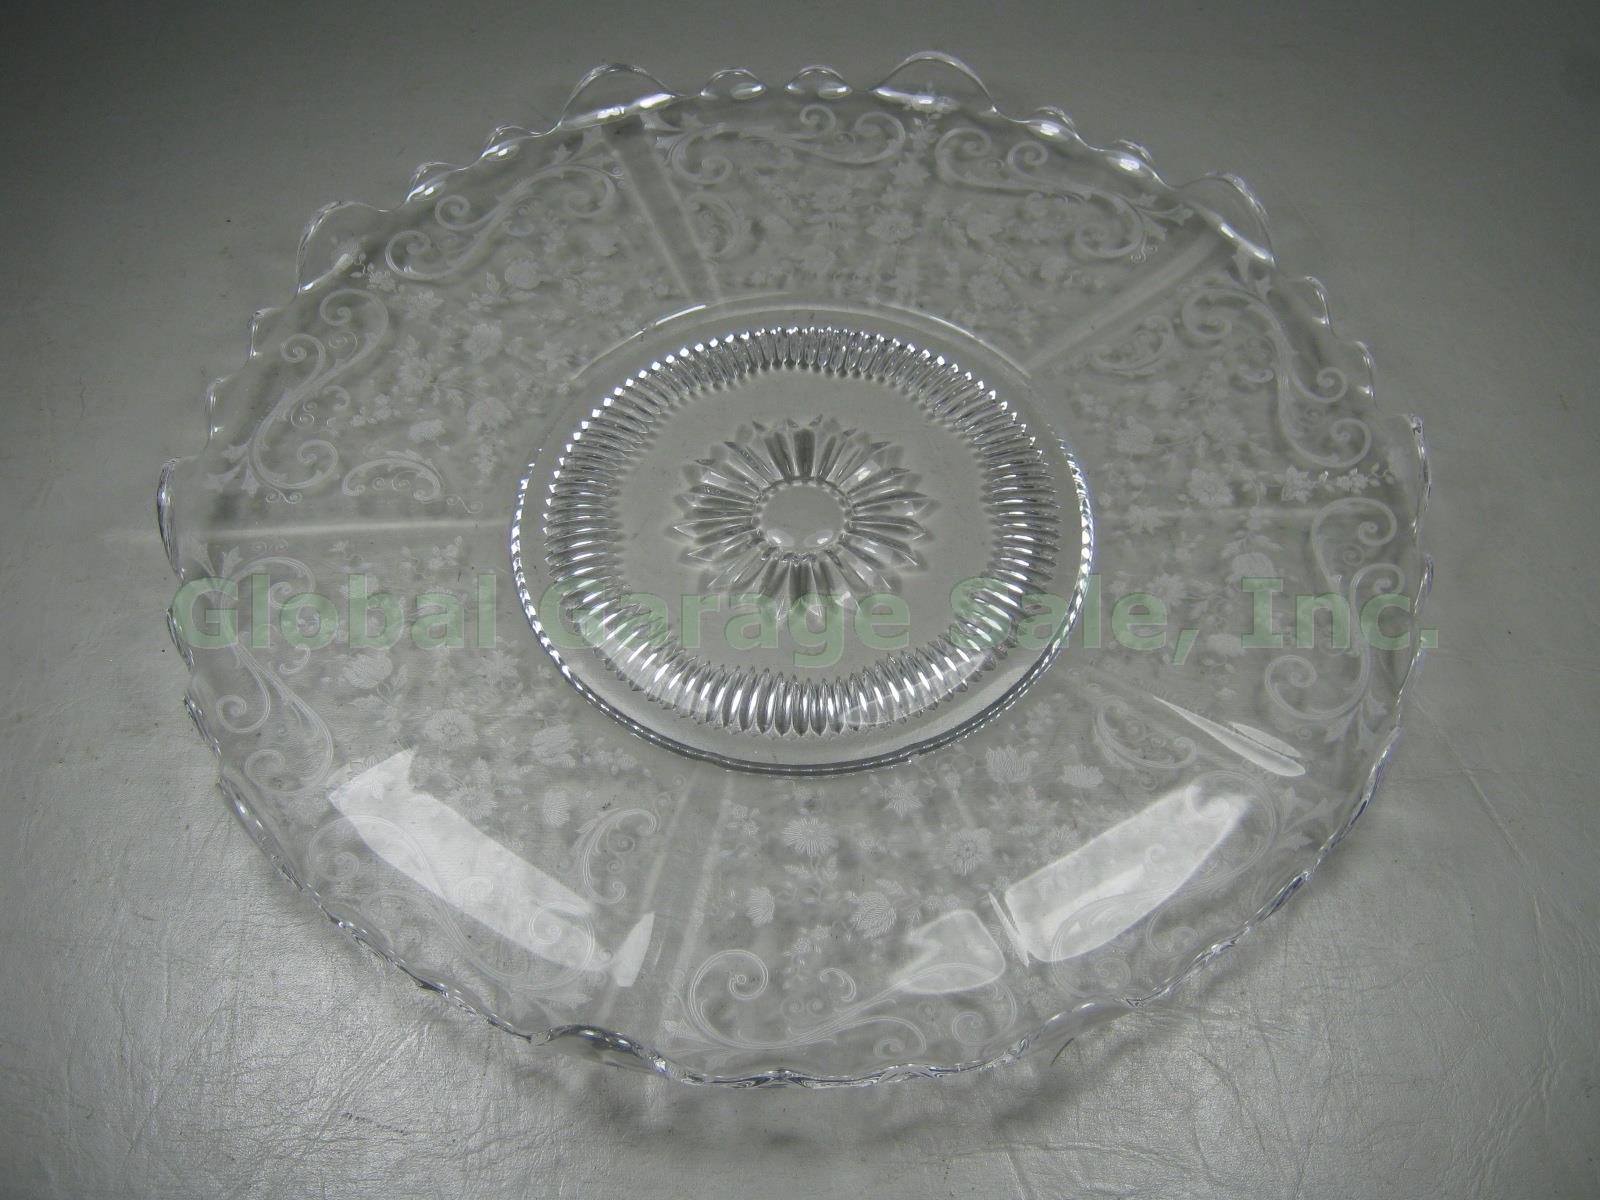 Cambridge Chantilly Etched Glass Serving Bowl Dish Handled Cake Plate Platter NR 7